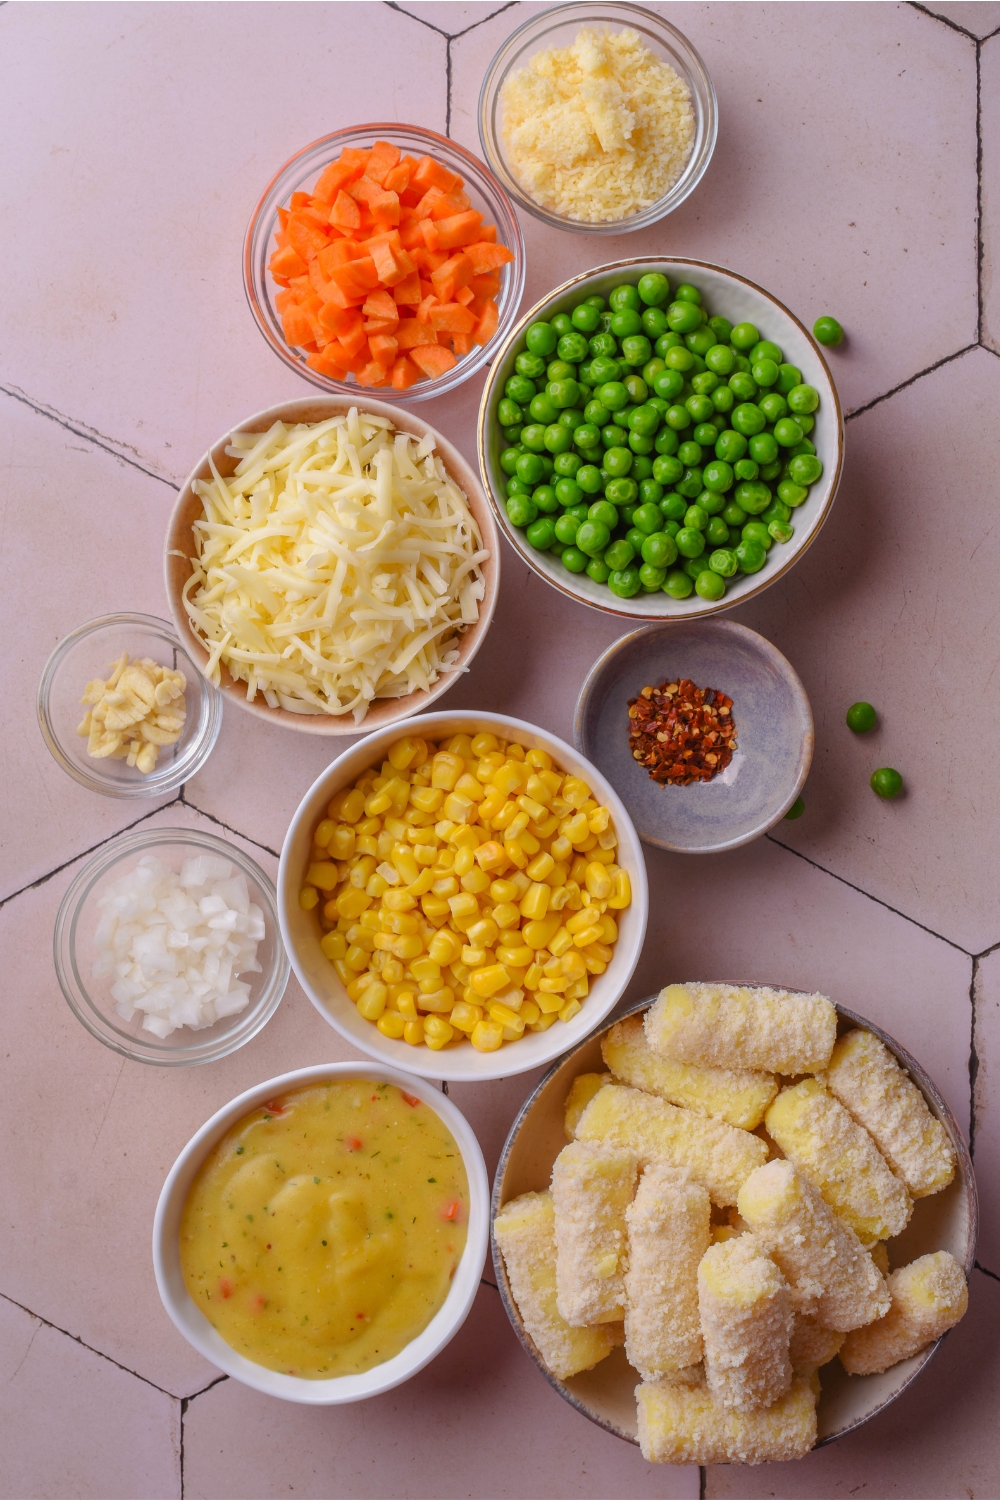 A countertop with multiple bowls containing peas, carrots, shredded cheese, red pepper flakes, corn, garlic, onion, condensed soup, and tater tots.